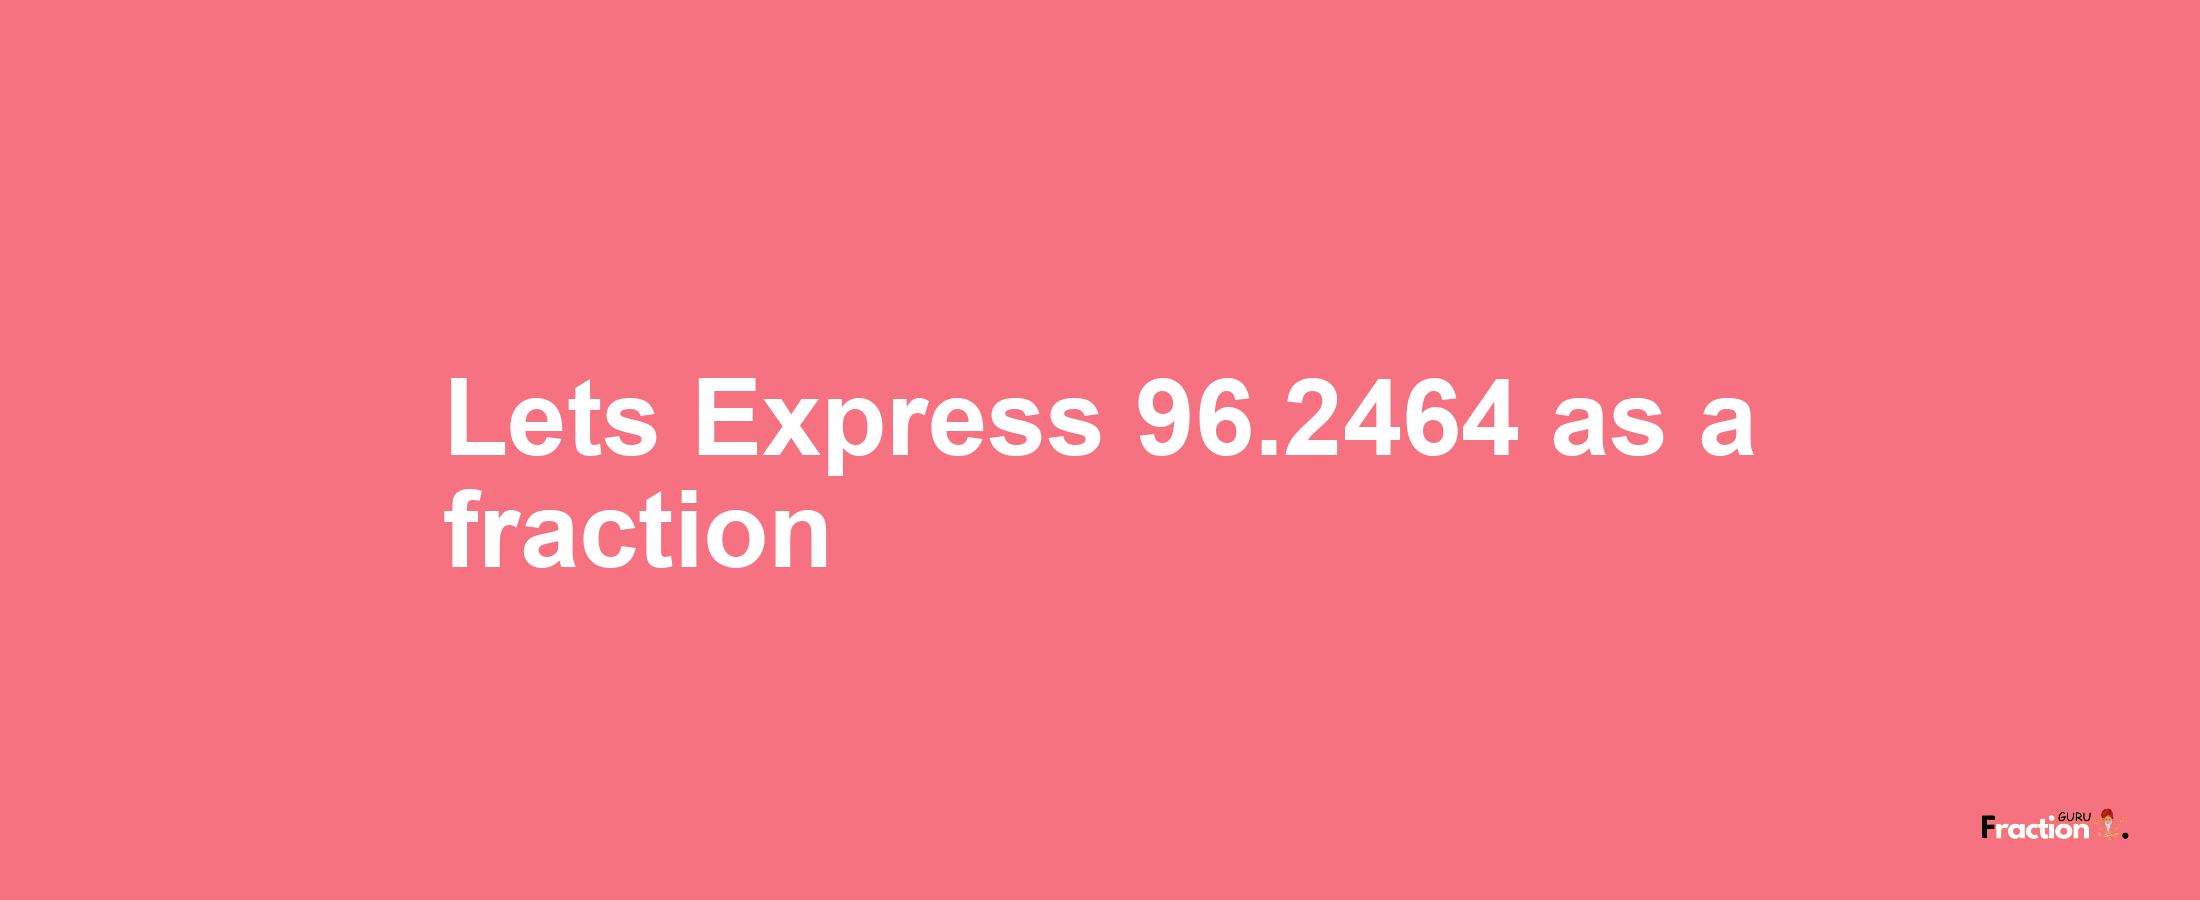 Lets Express 96.2464 as afraction